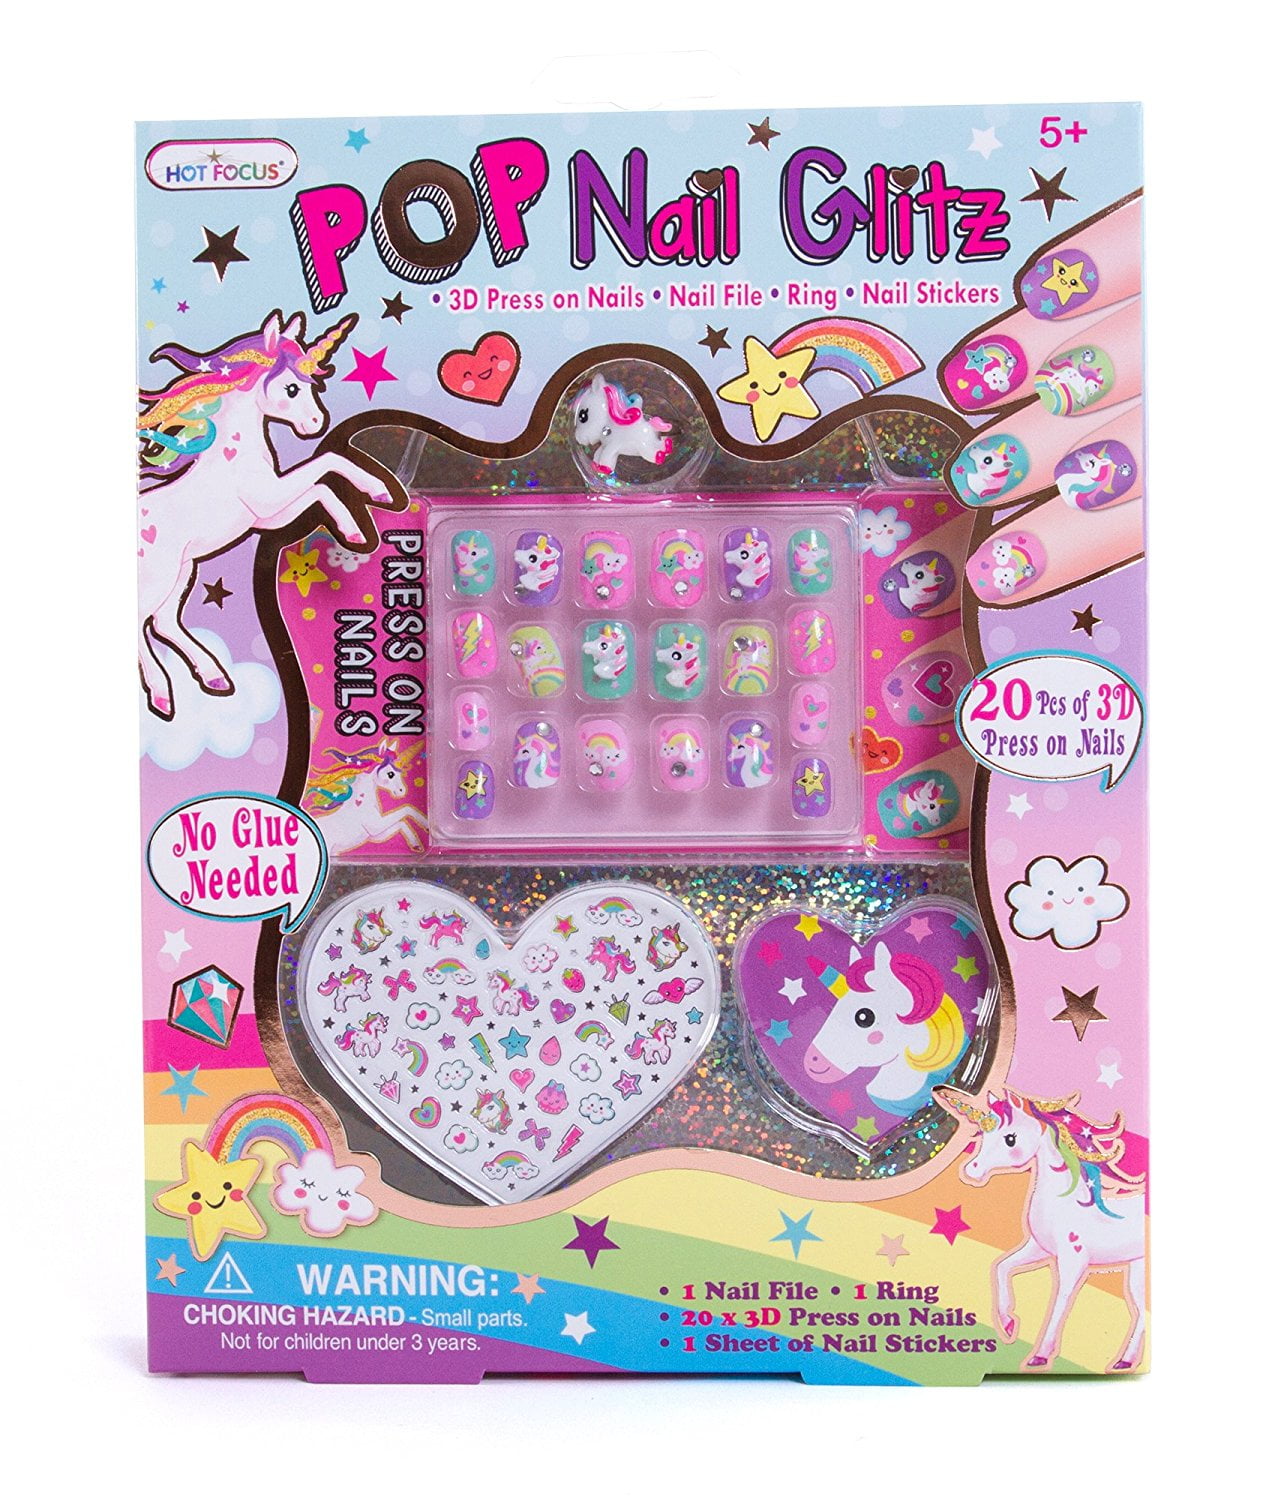 Poly Nail Gel Kit with LED Lamp, Slip Solution and Glitter Poly Nail Gel  All-in-One Travel Kit - Walmart.com